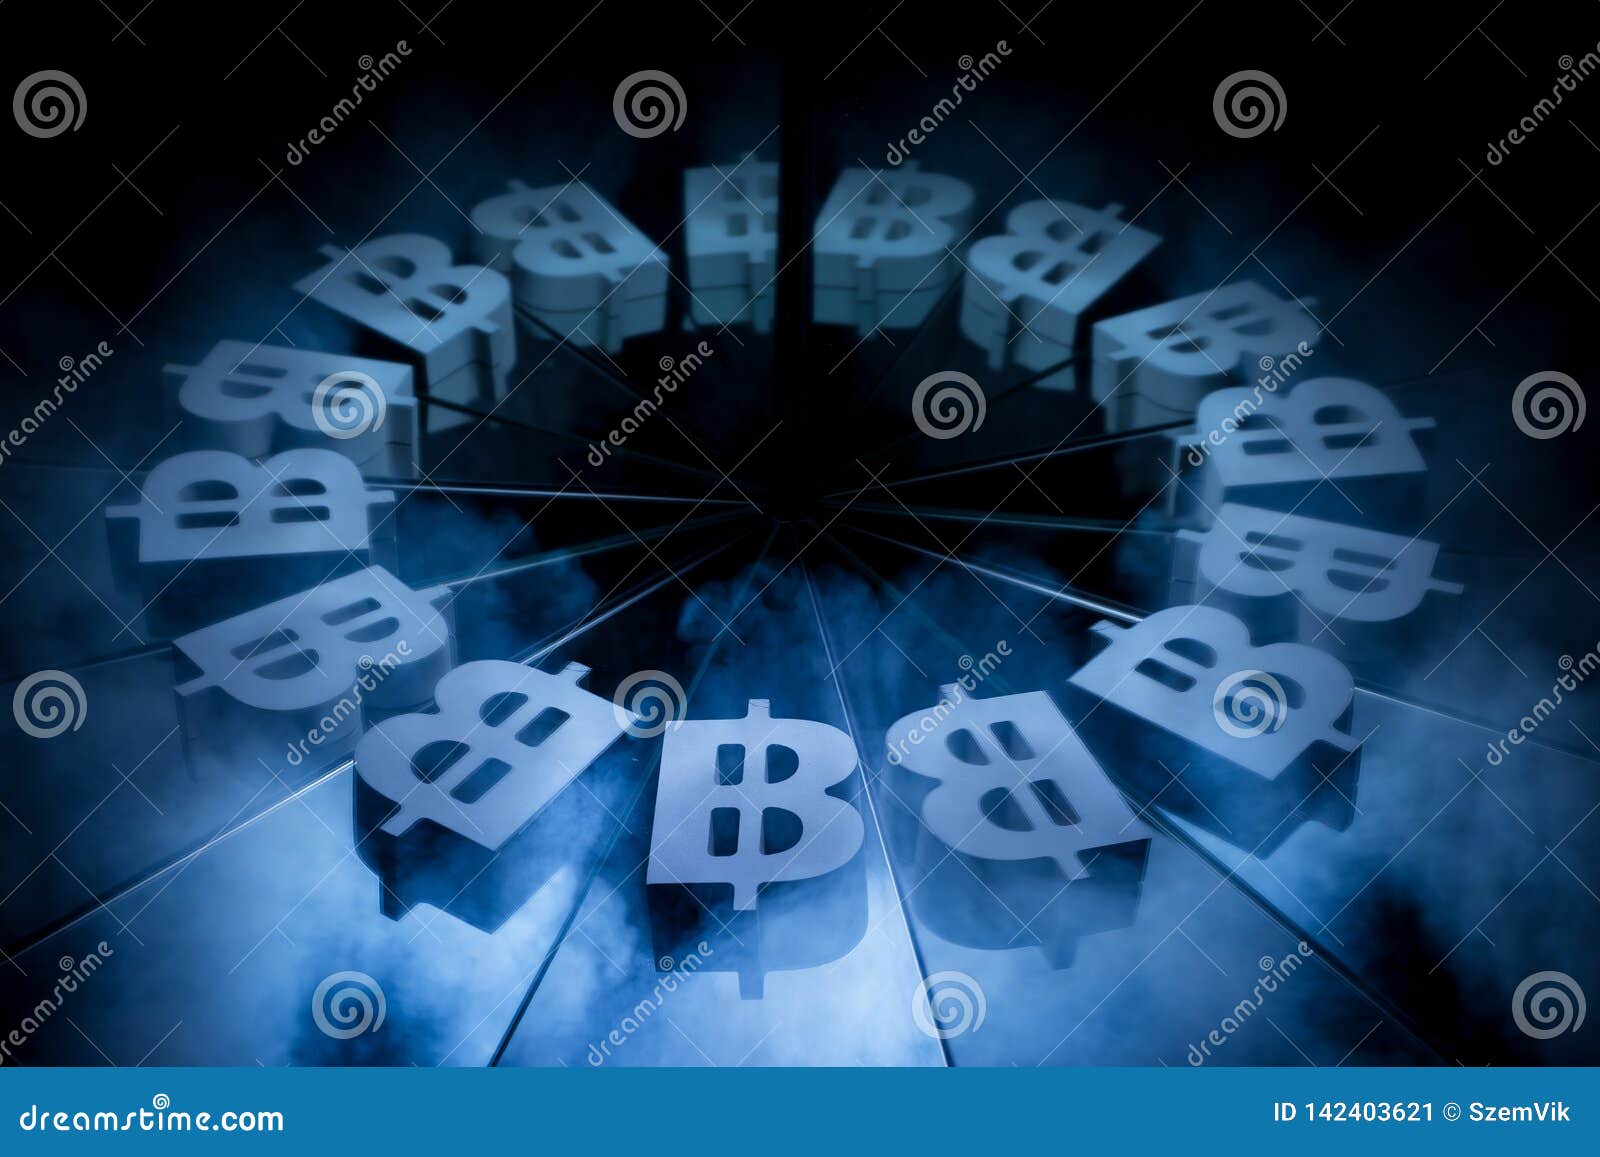 Bitcoin Currency Symbol Covered In Dark Winter Fog Stock ...